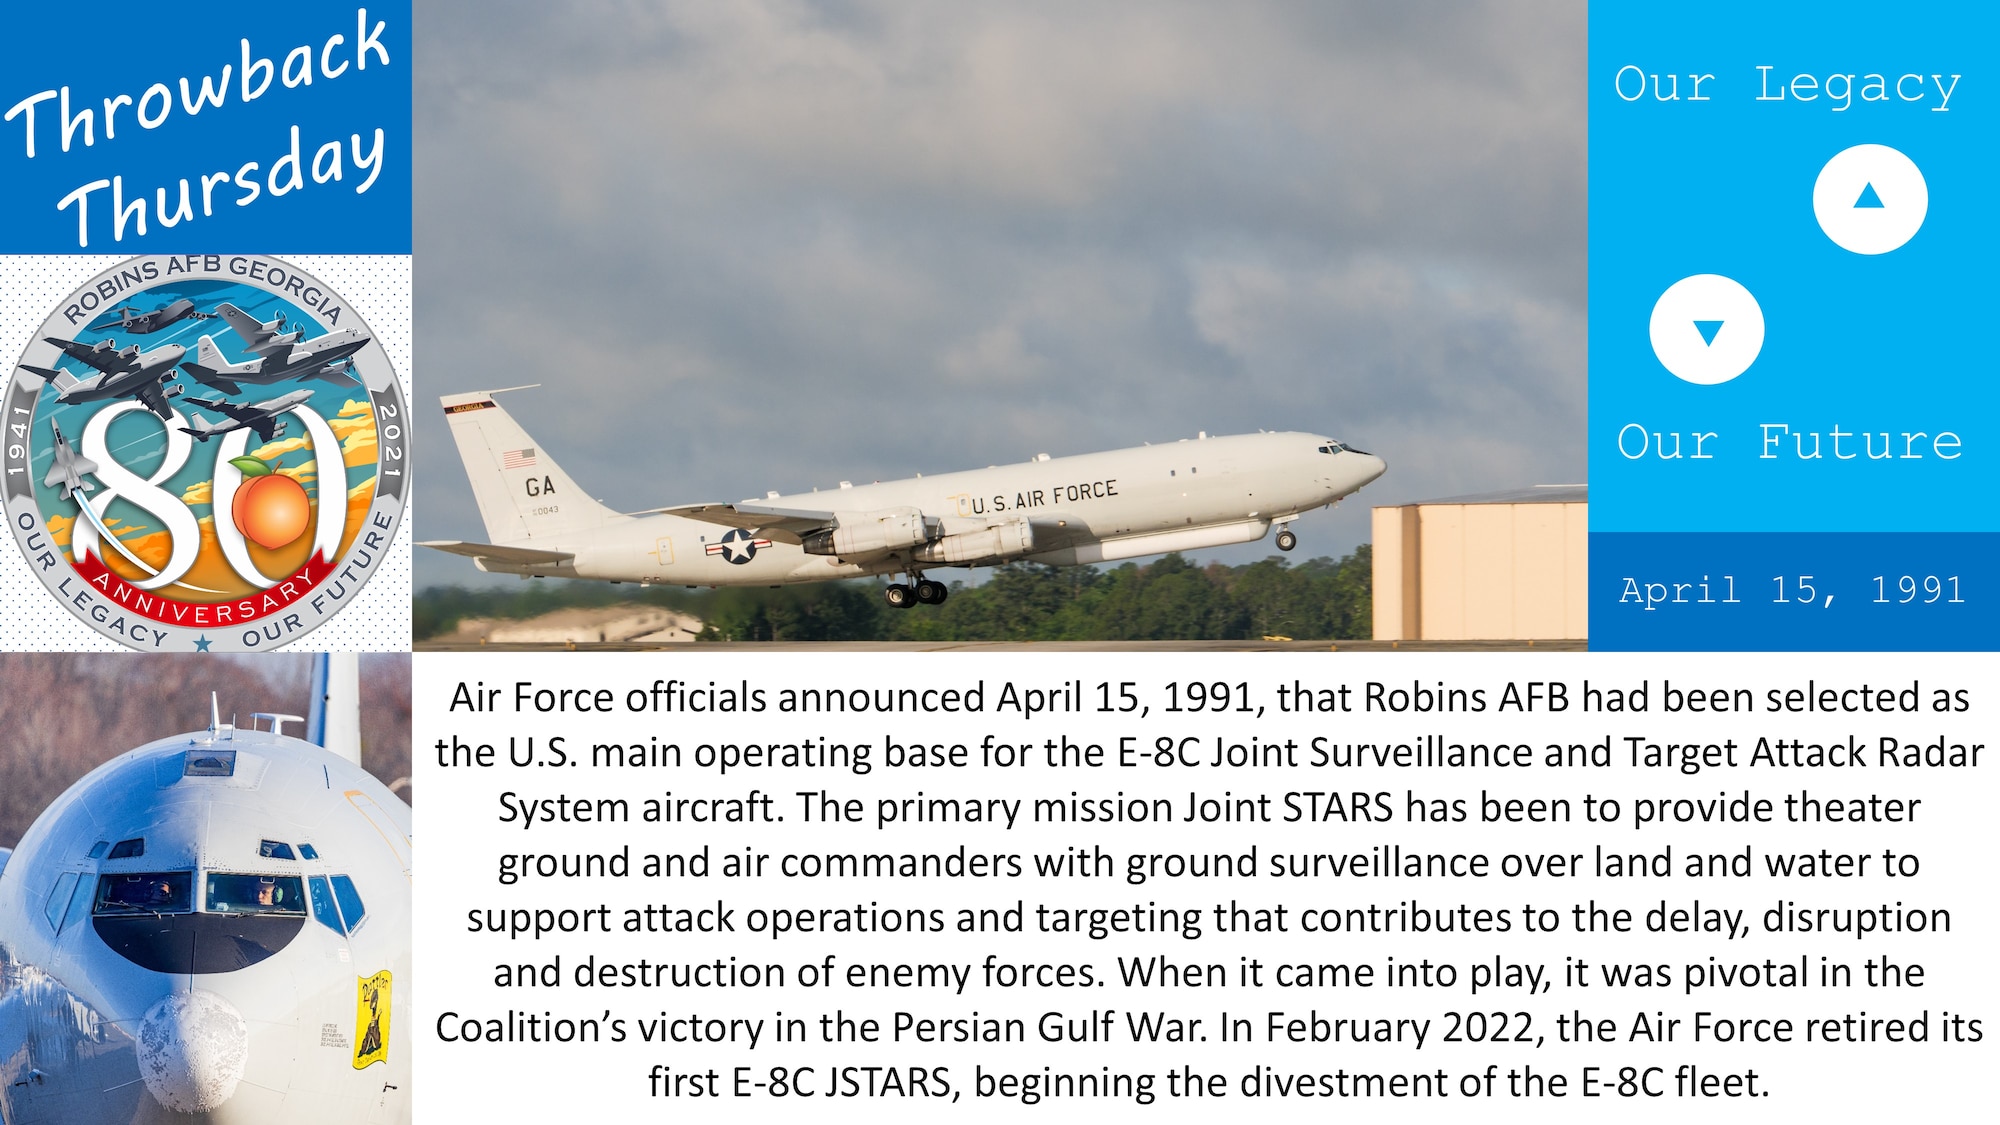 Graphic shows photos of an E-8C JSTARS aircraft taking off and the looking into the cockpit of an E-8C JSTARS aircraft.